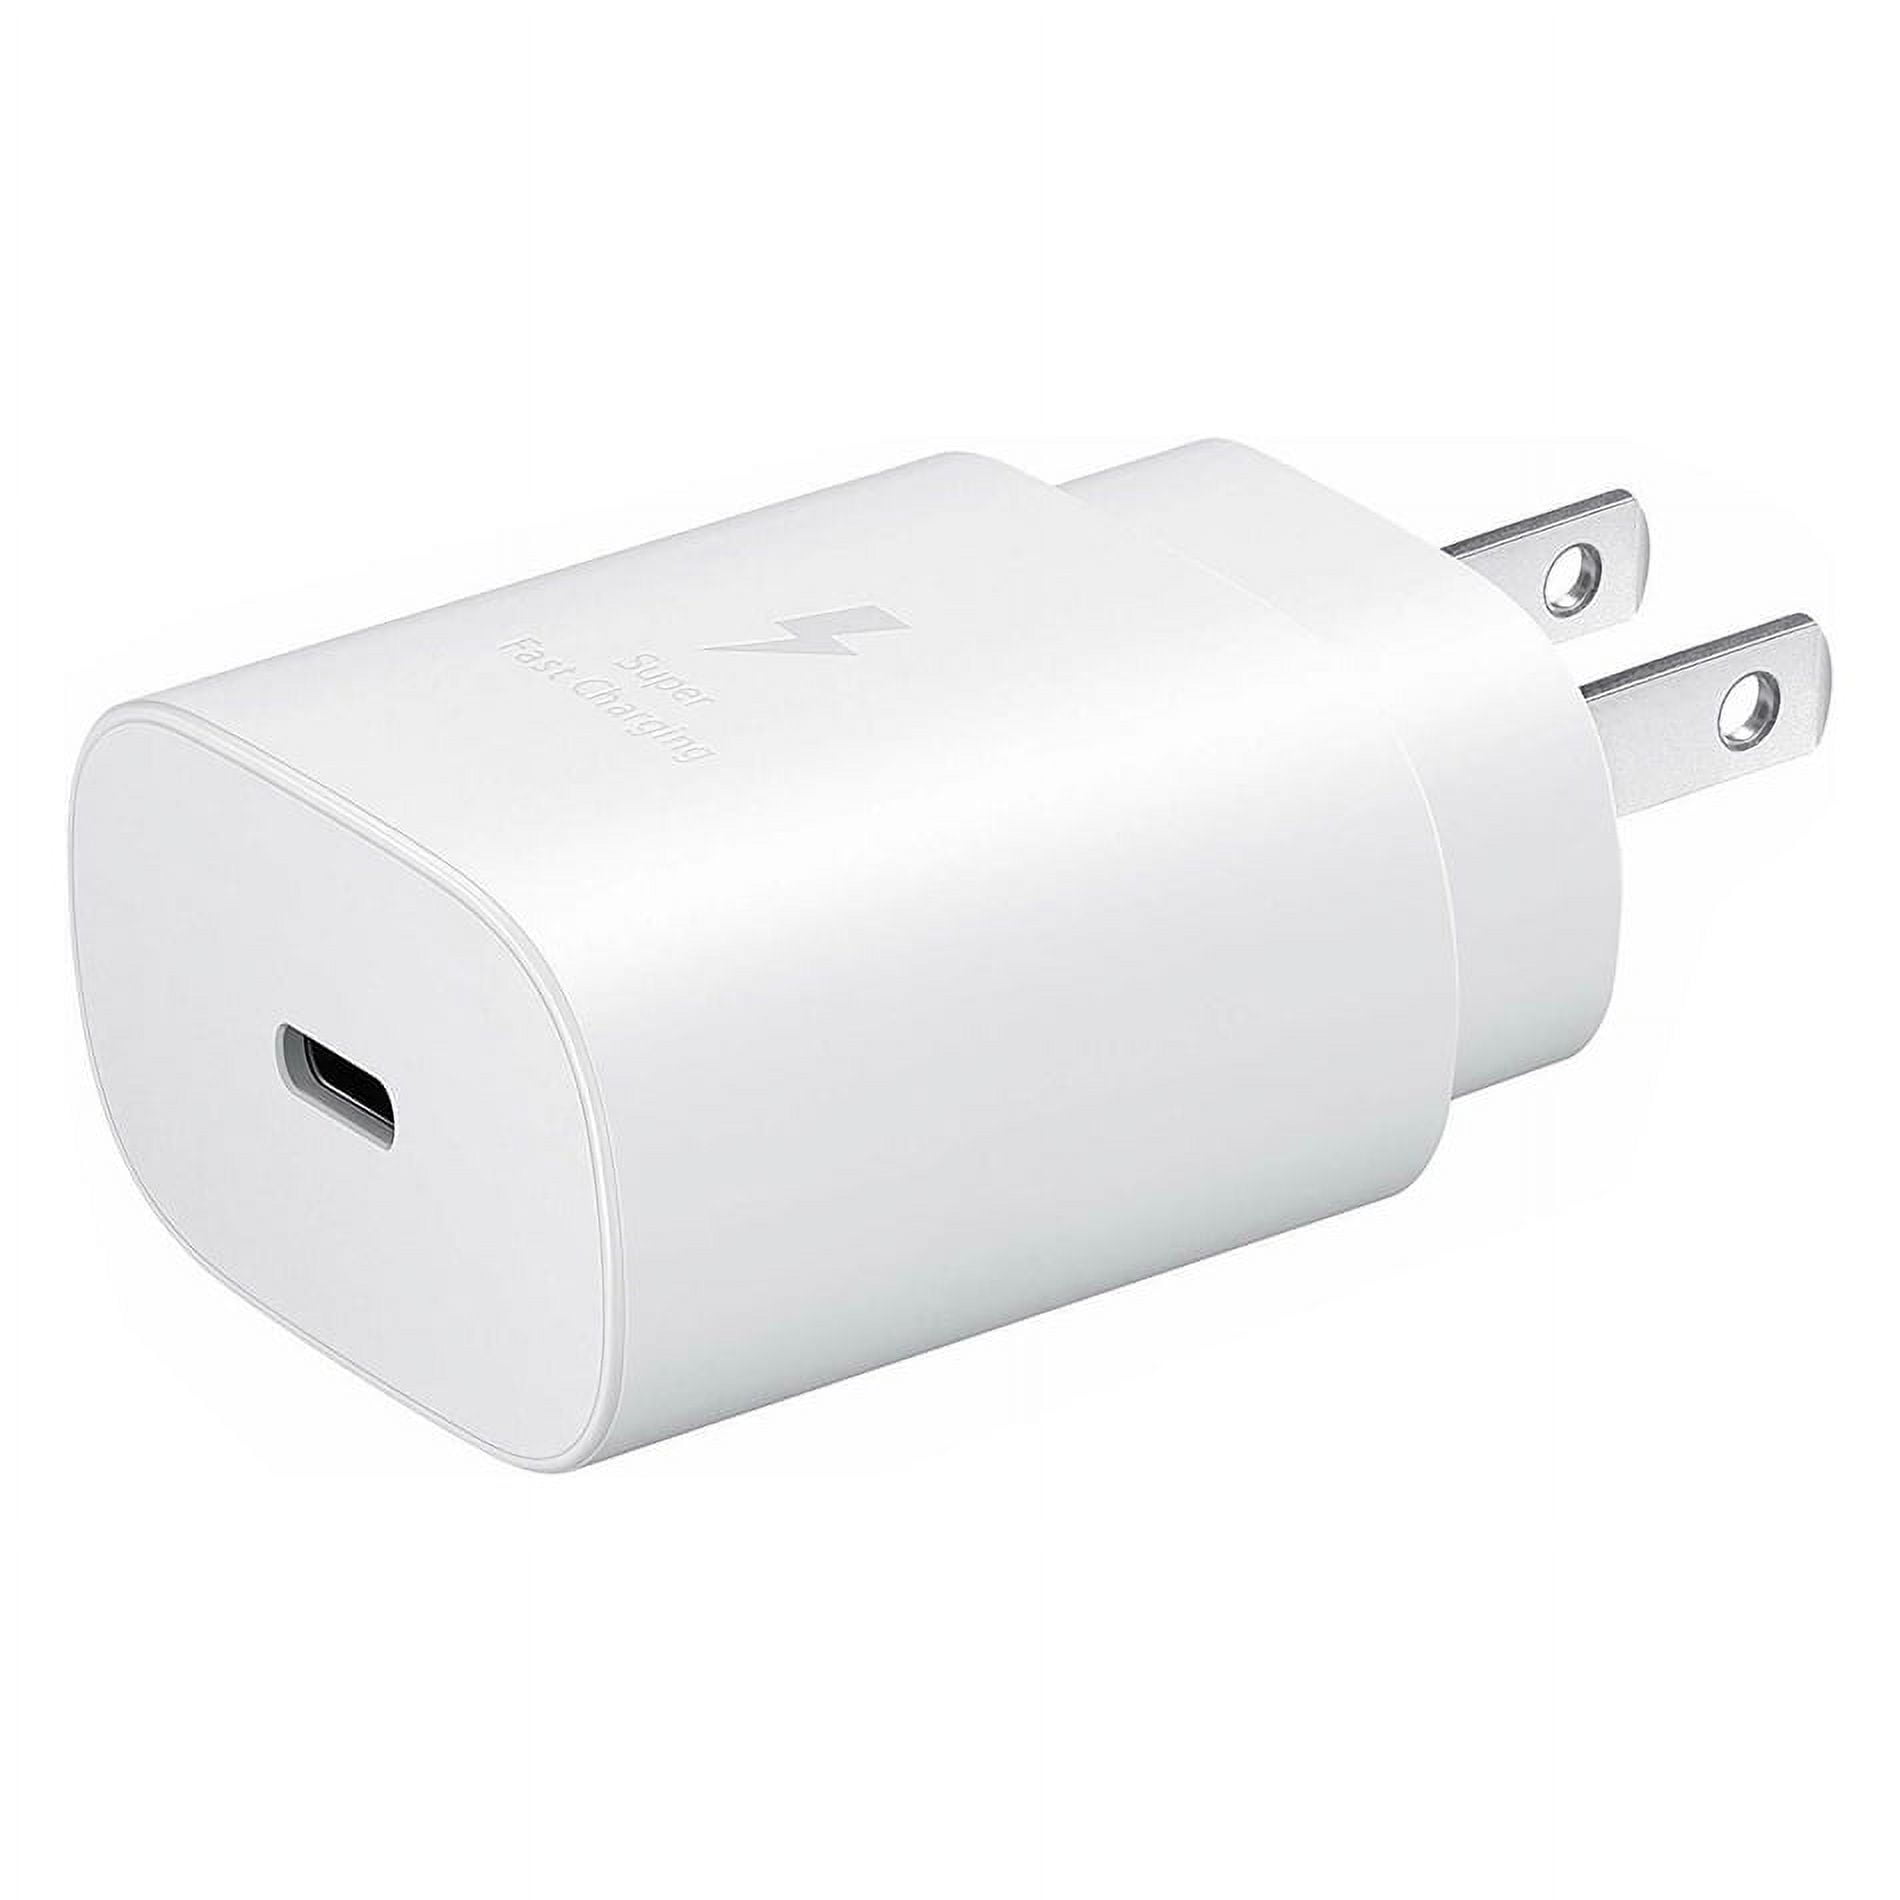 Samsung 25W USB-C Super Fast Charging Wall Charger - White (US Version )